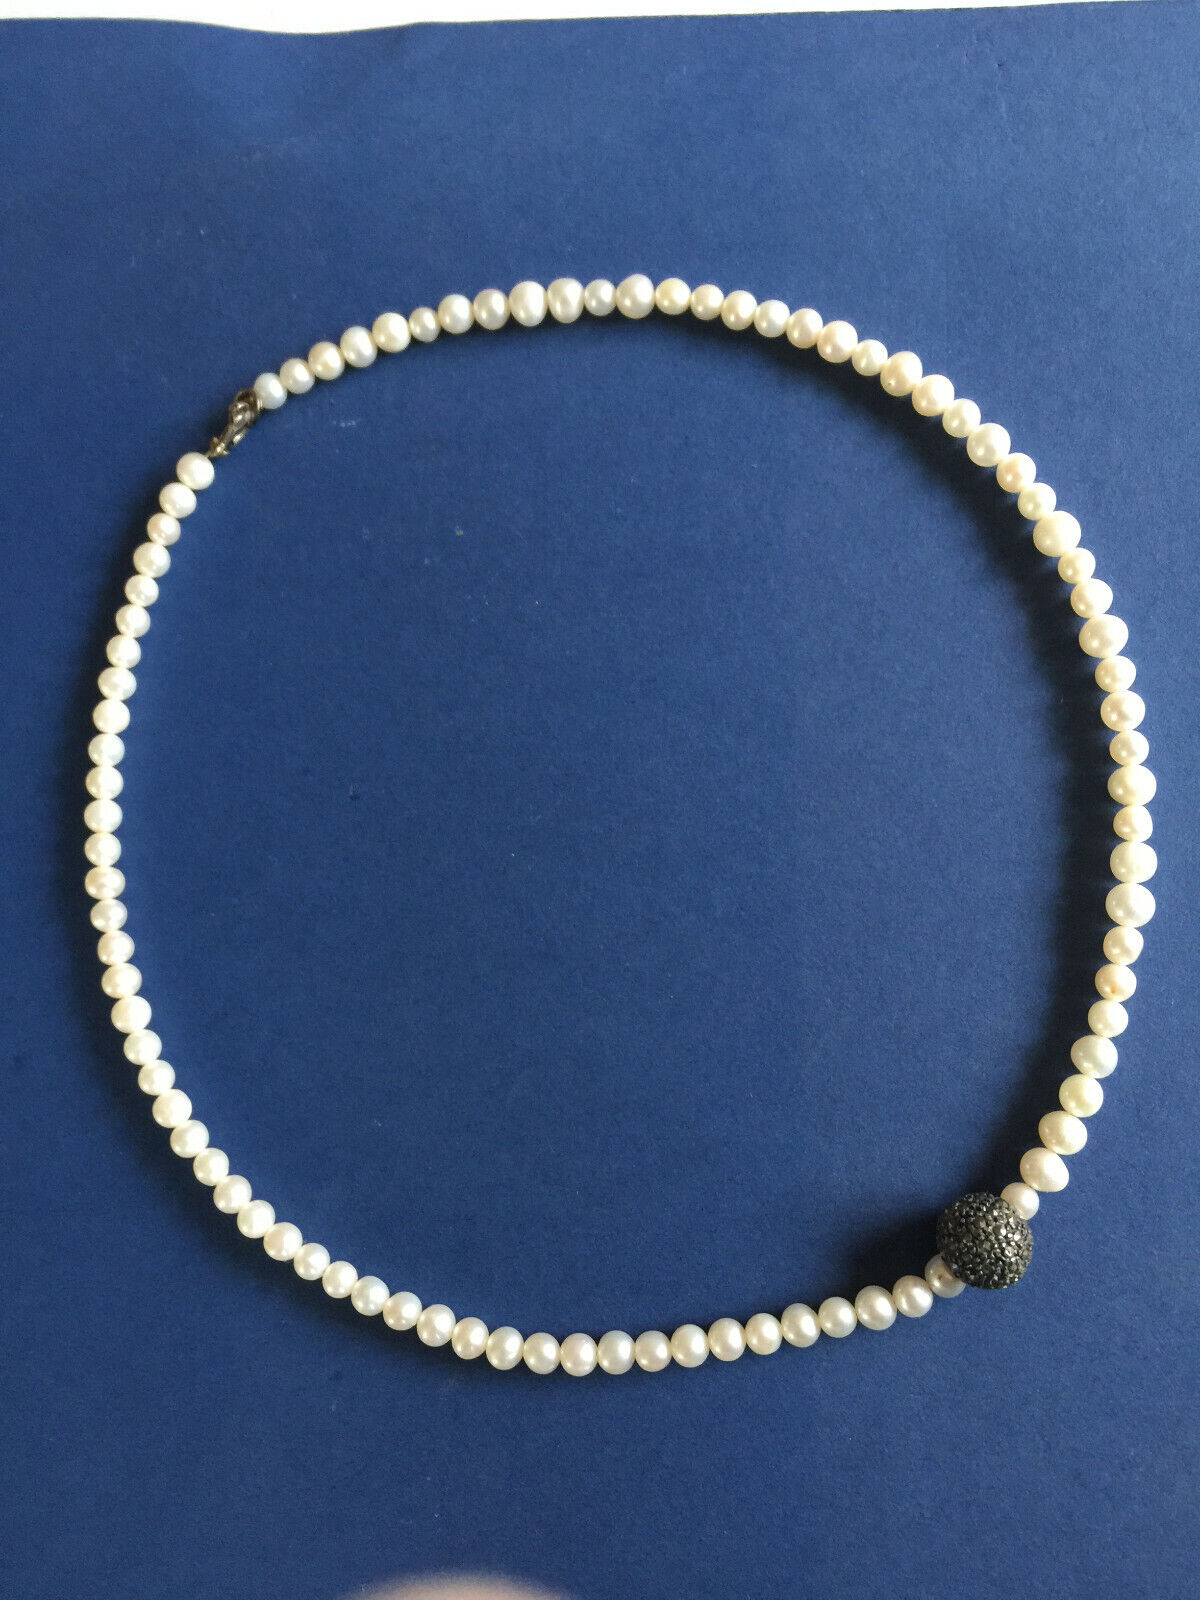 Vintage Natural Pearl Necklace W. Small Silver Pendant:  Bead Size 3/16\